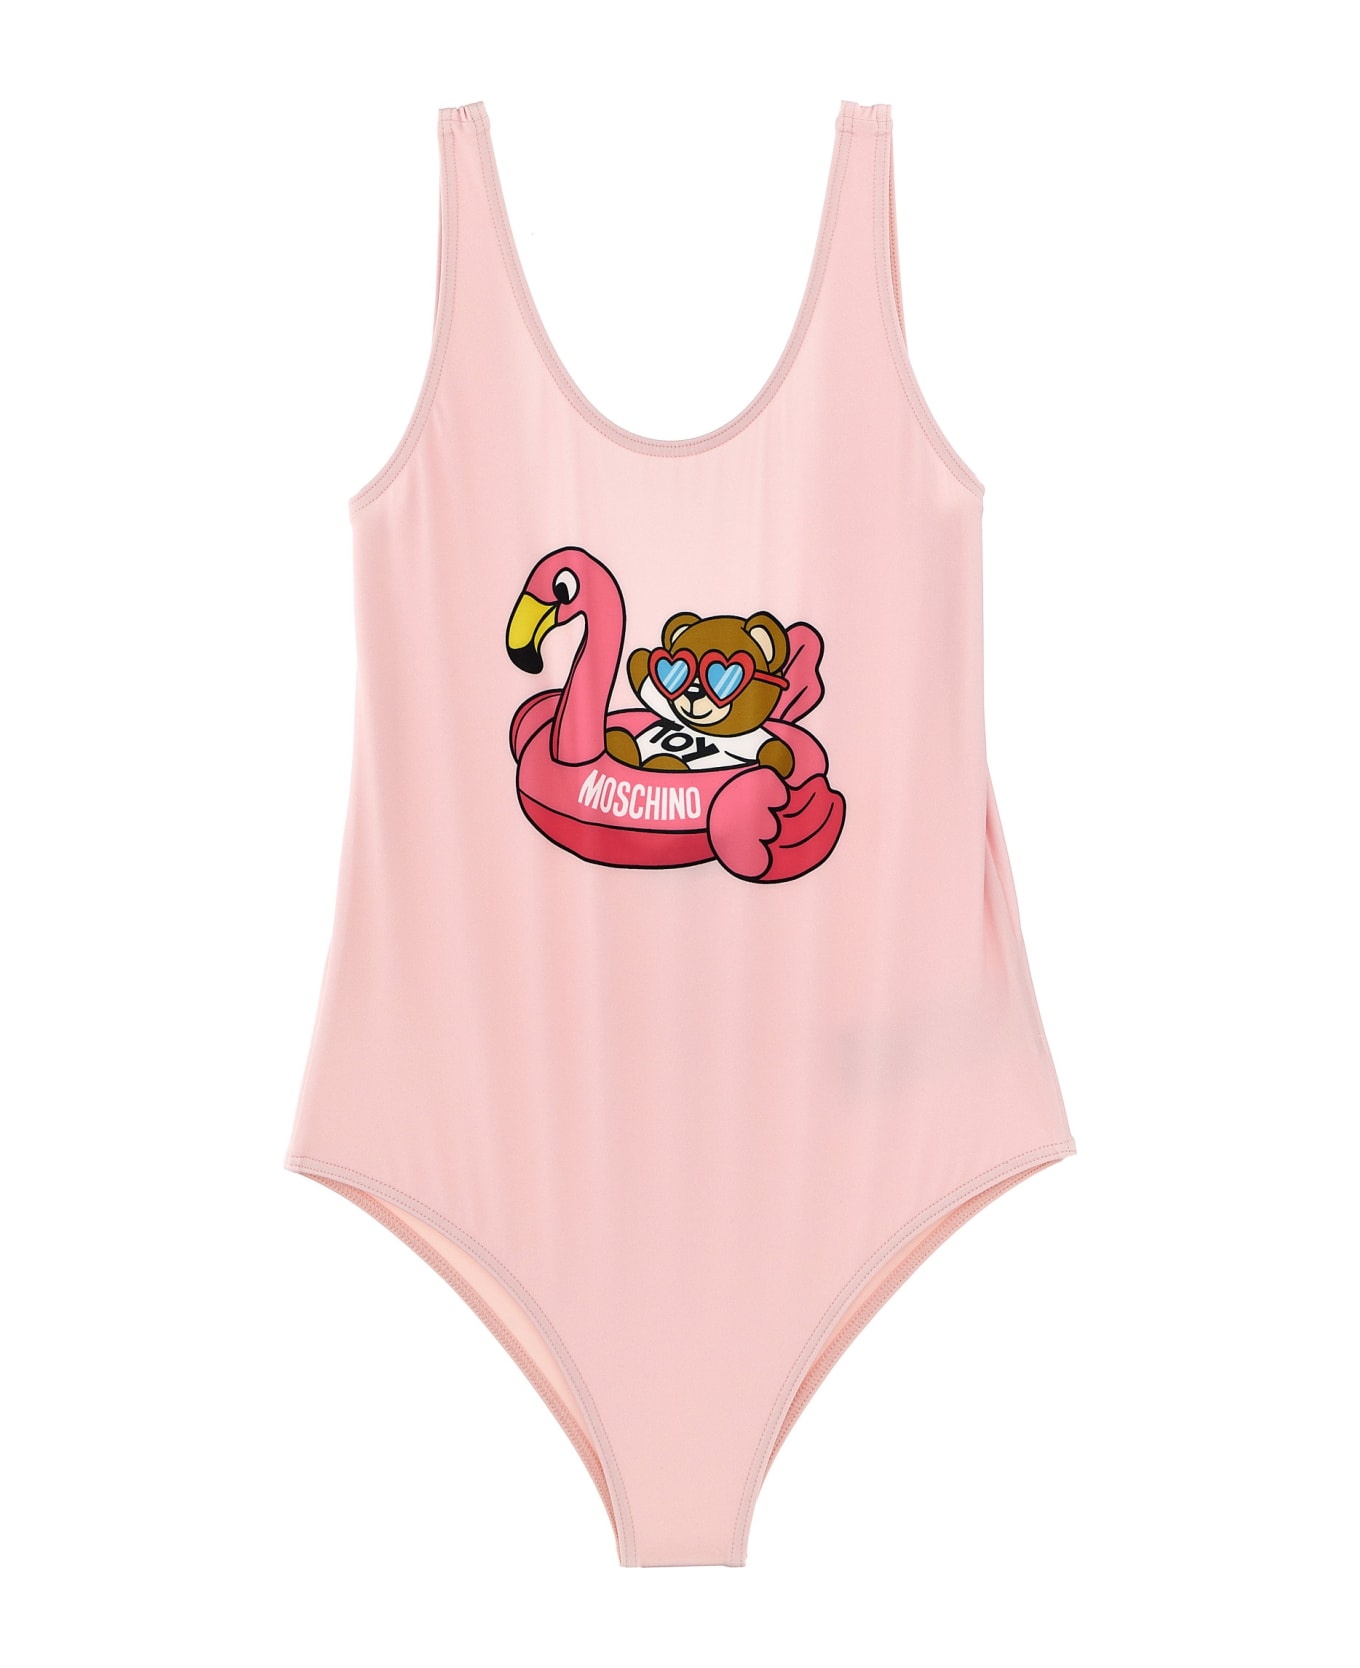 Moschino One-piece Swimsuit With Logo Print - Pink 水着